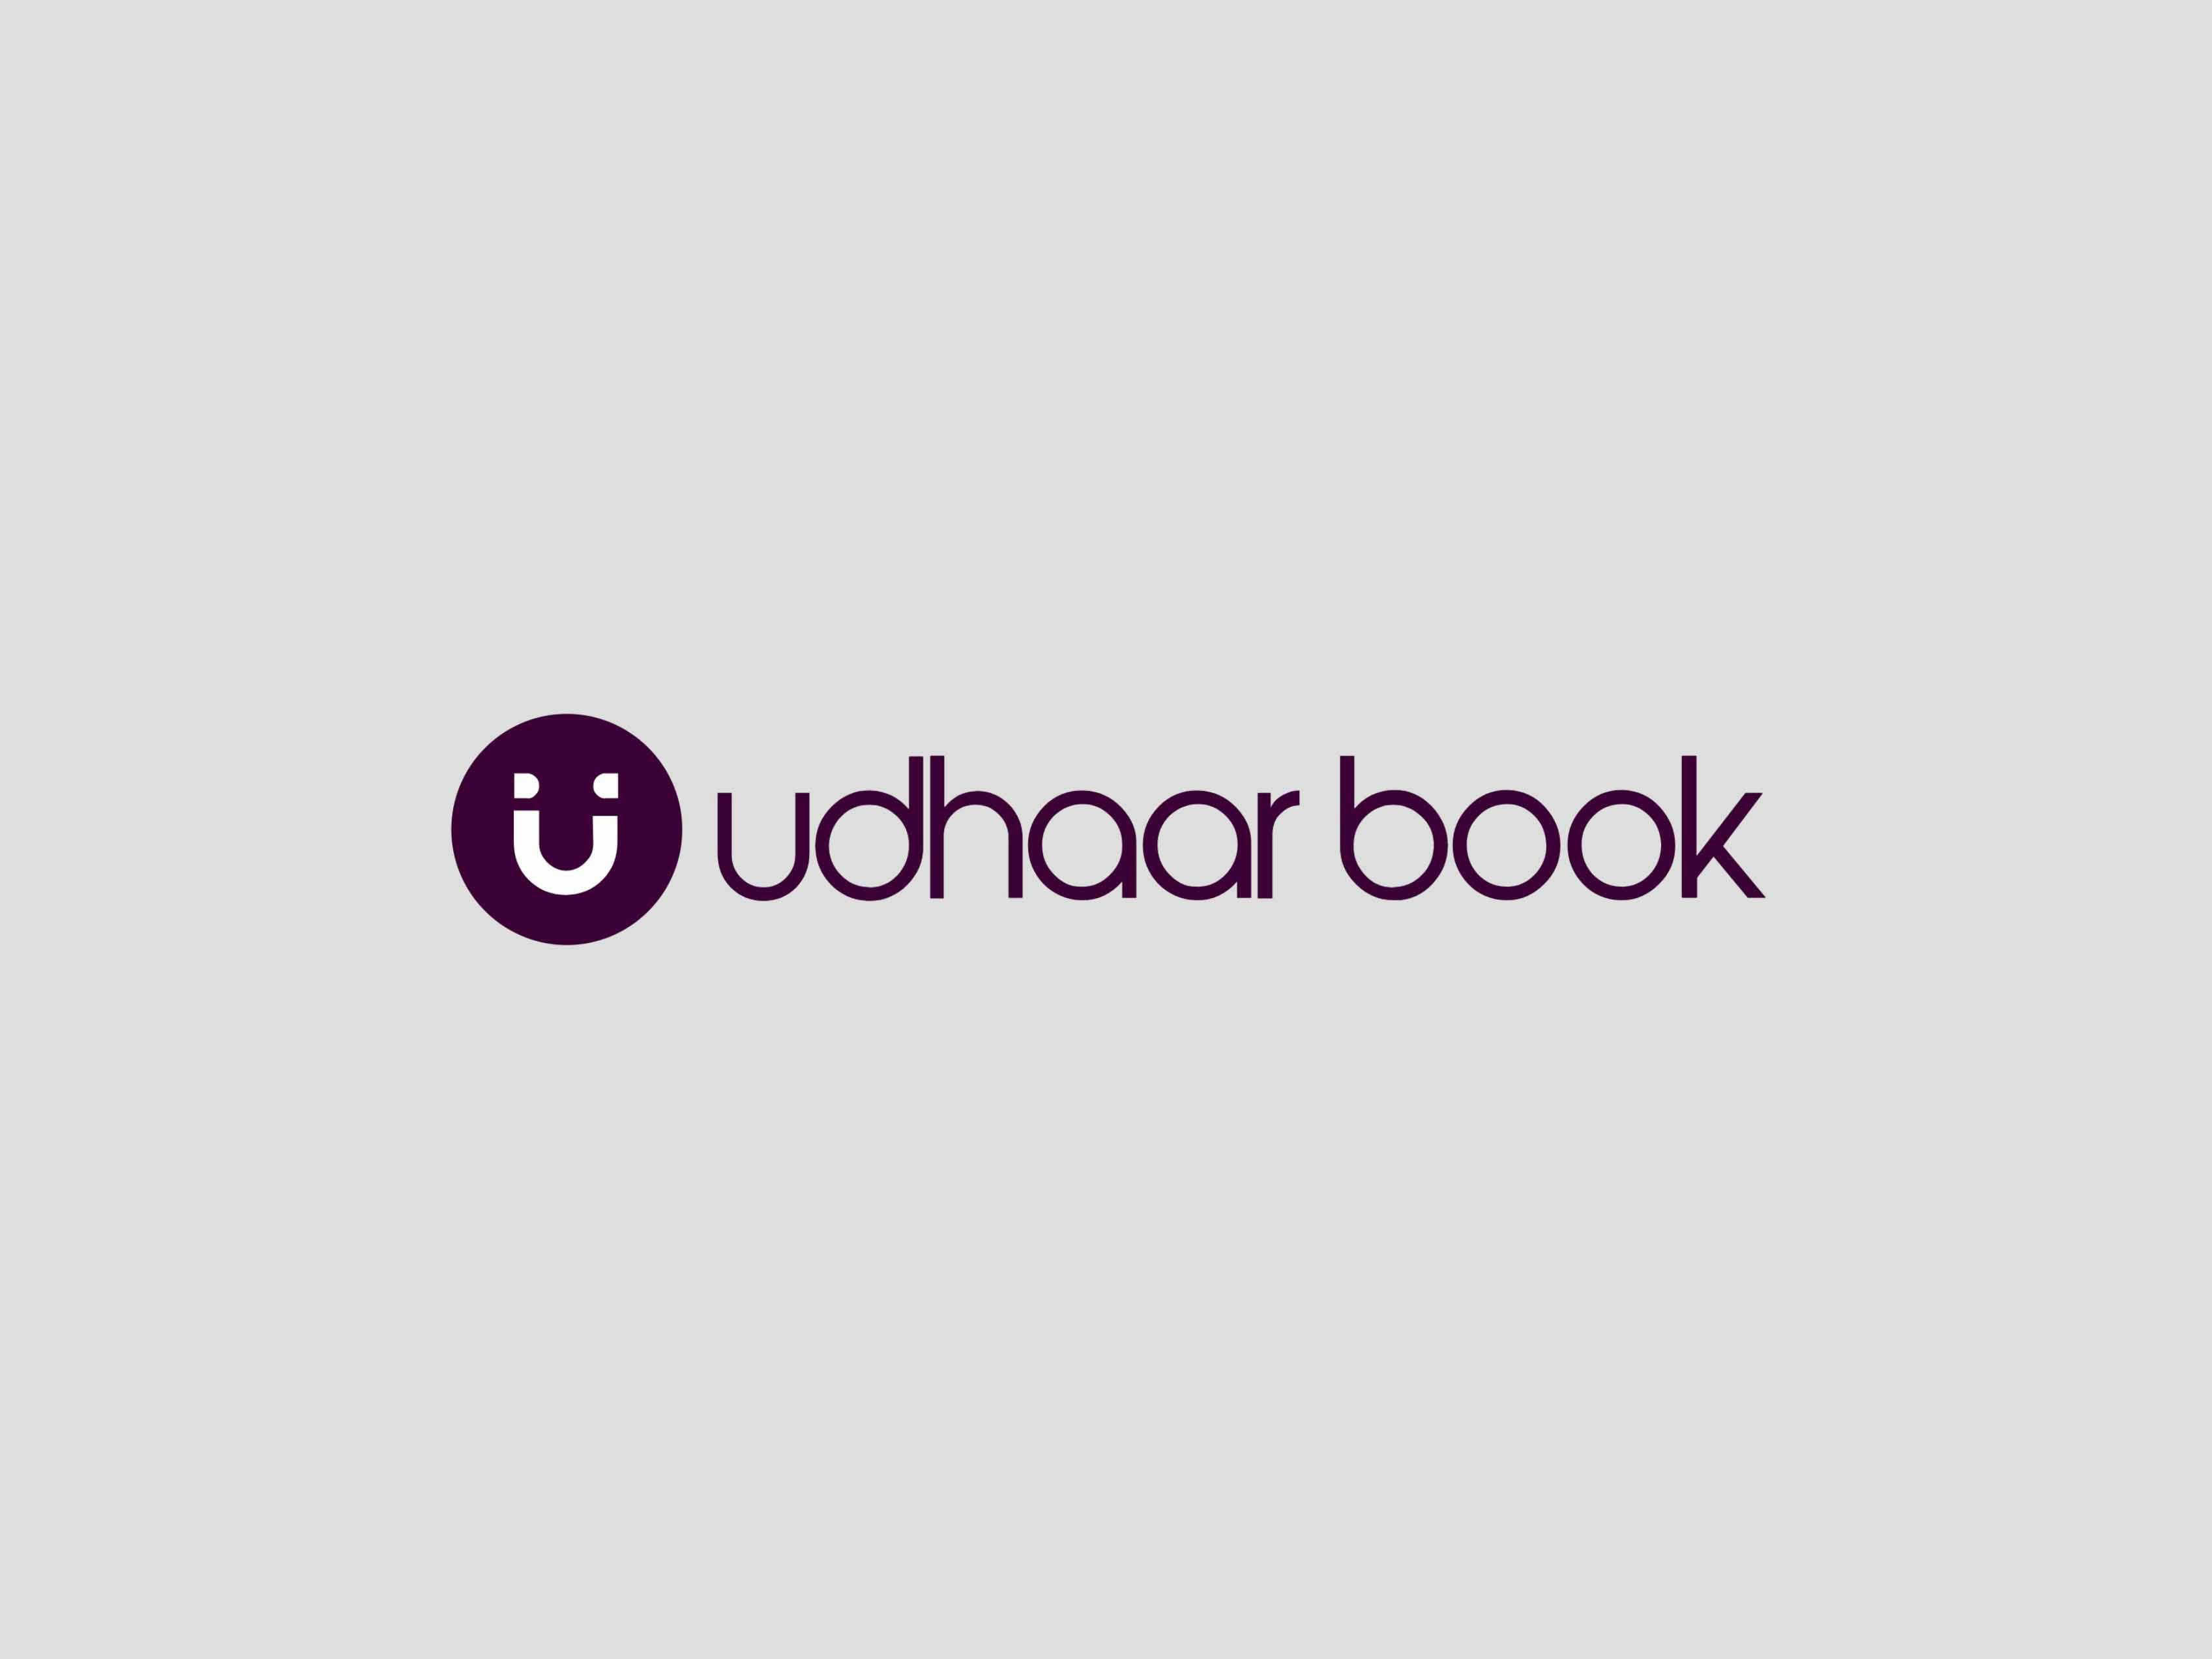 udhaar-book-raises-seed-funding-for-the-digitization-of-small-store-registers